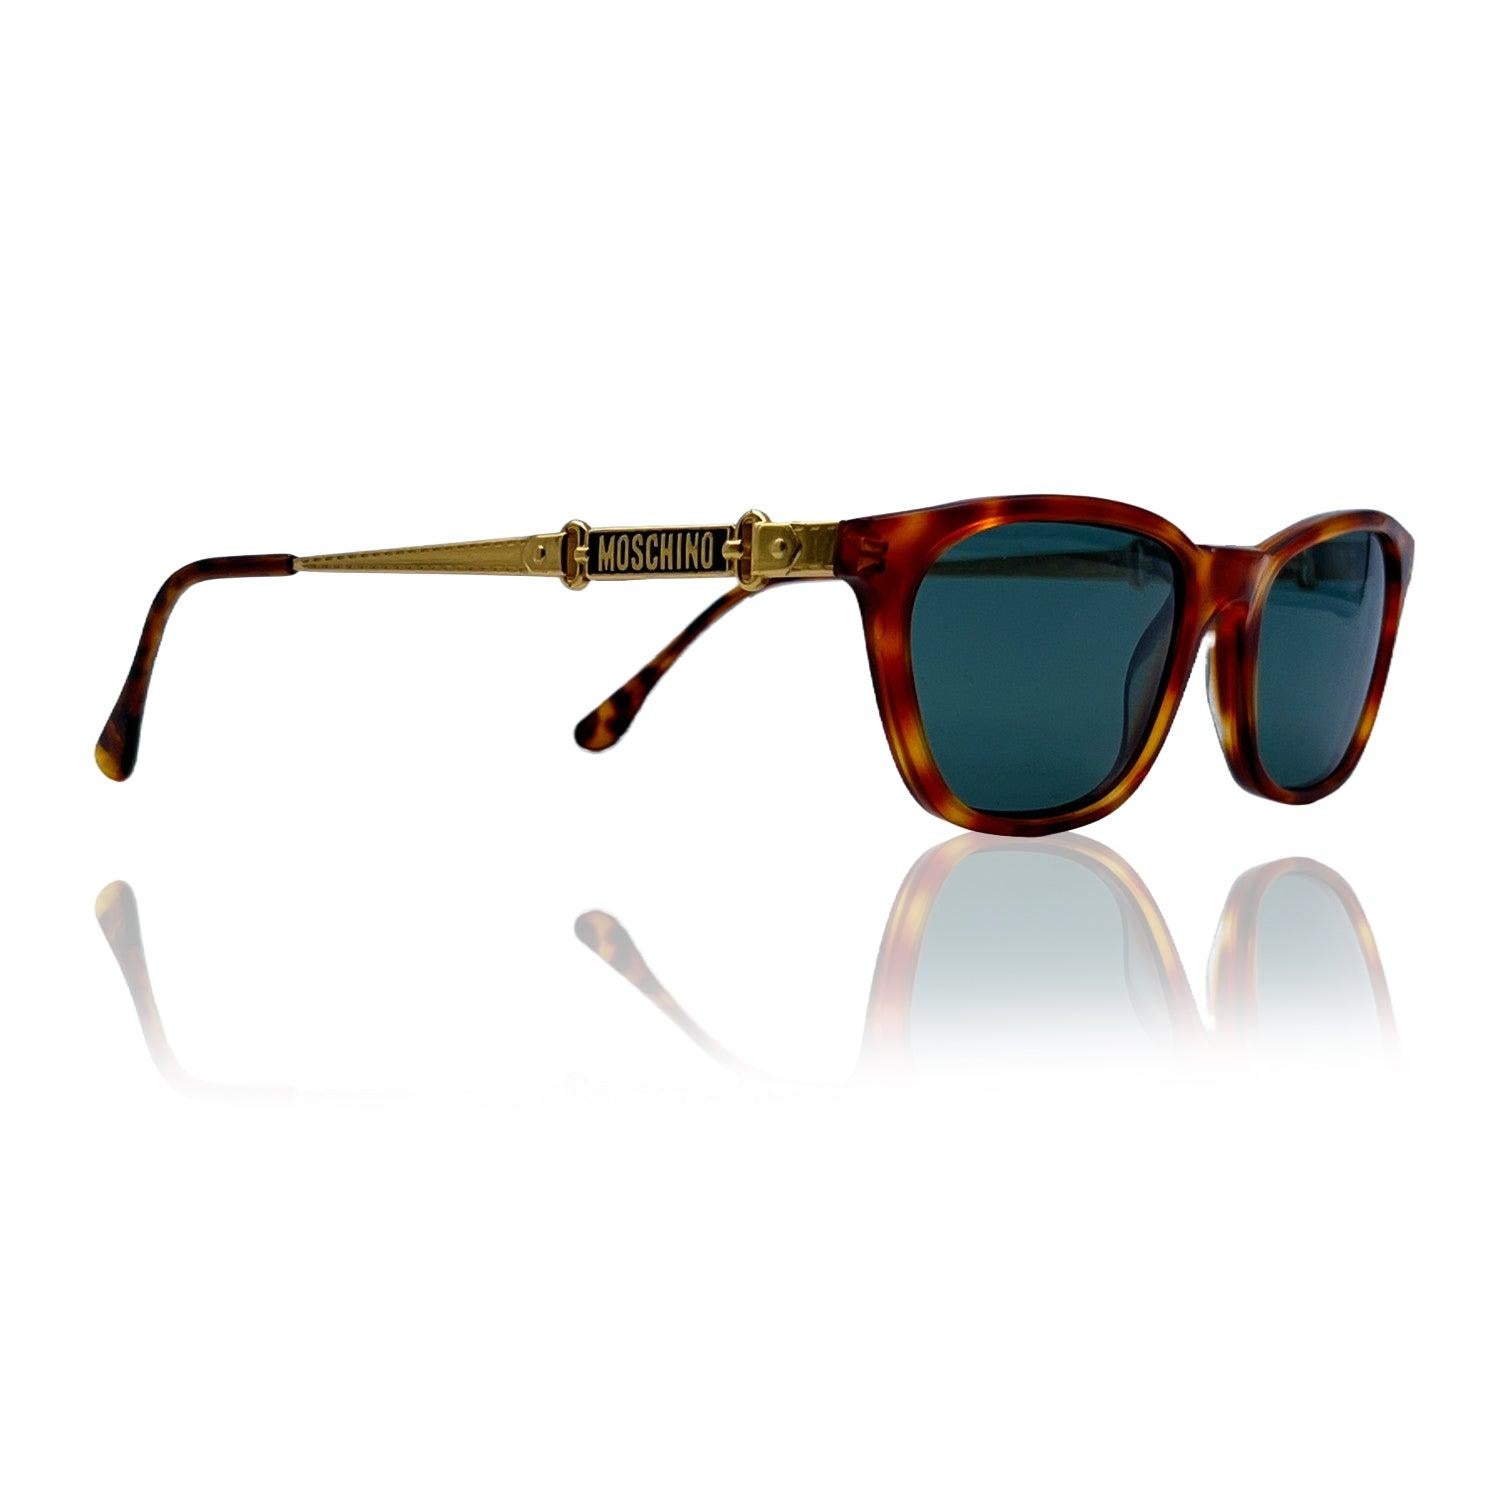 Moschino by Persol Vintage Brown Unisex Sunglasses Mod. M55 54/19 In Excellent Condition In Rome, Rome